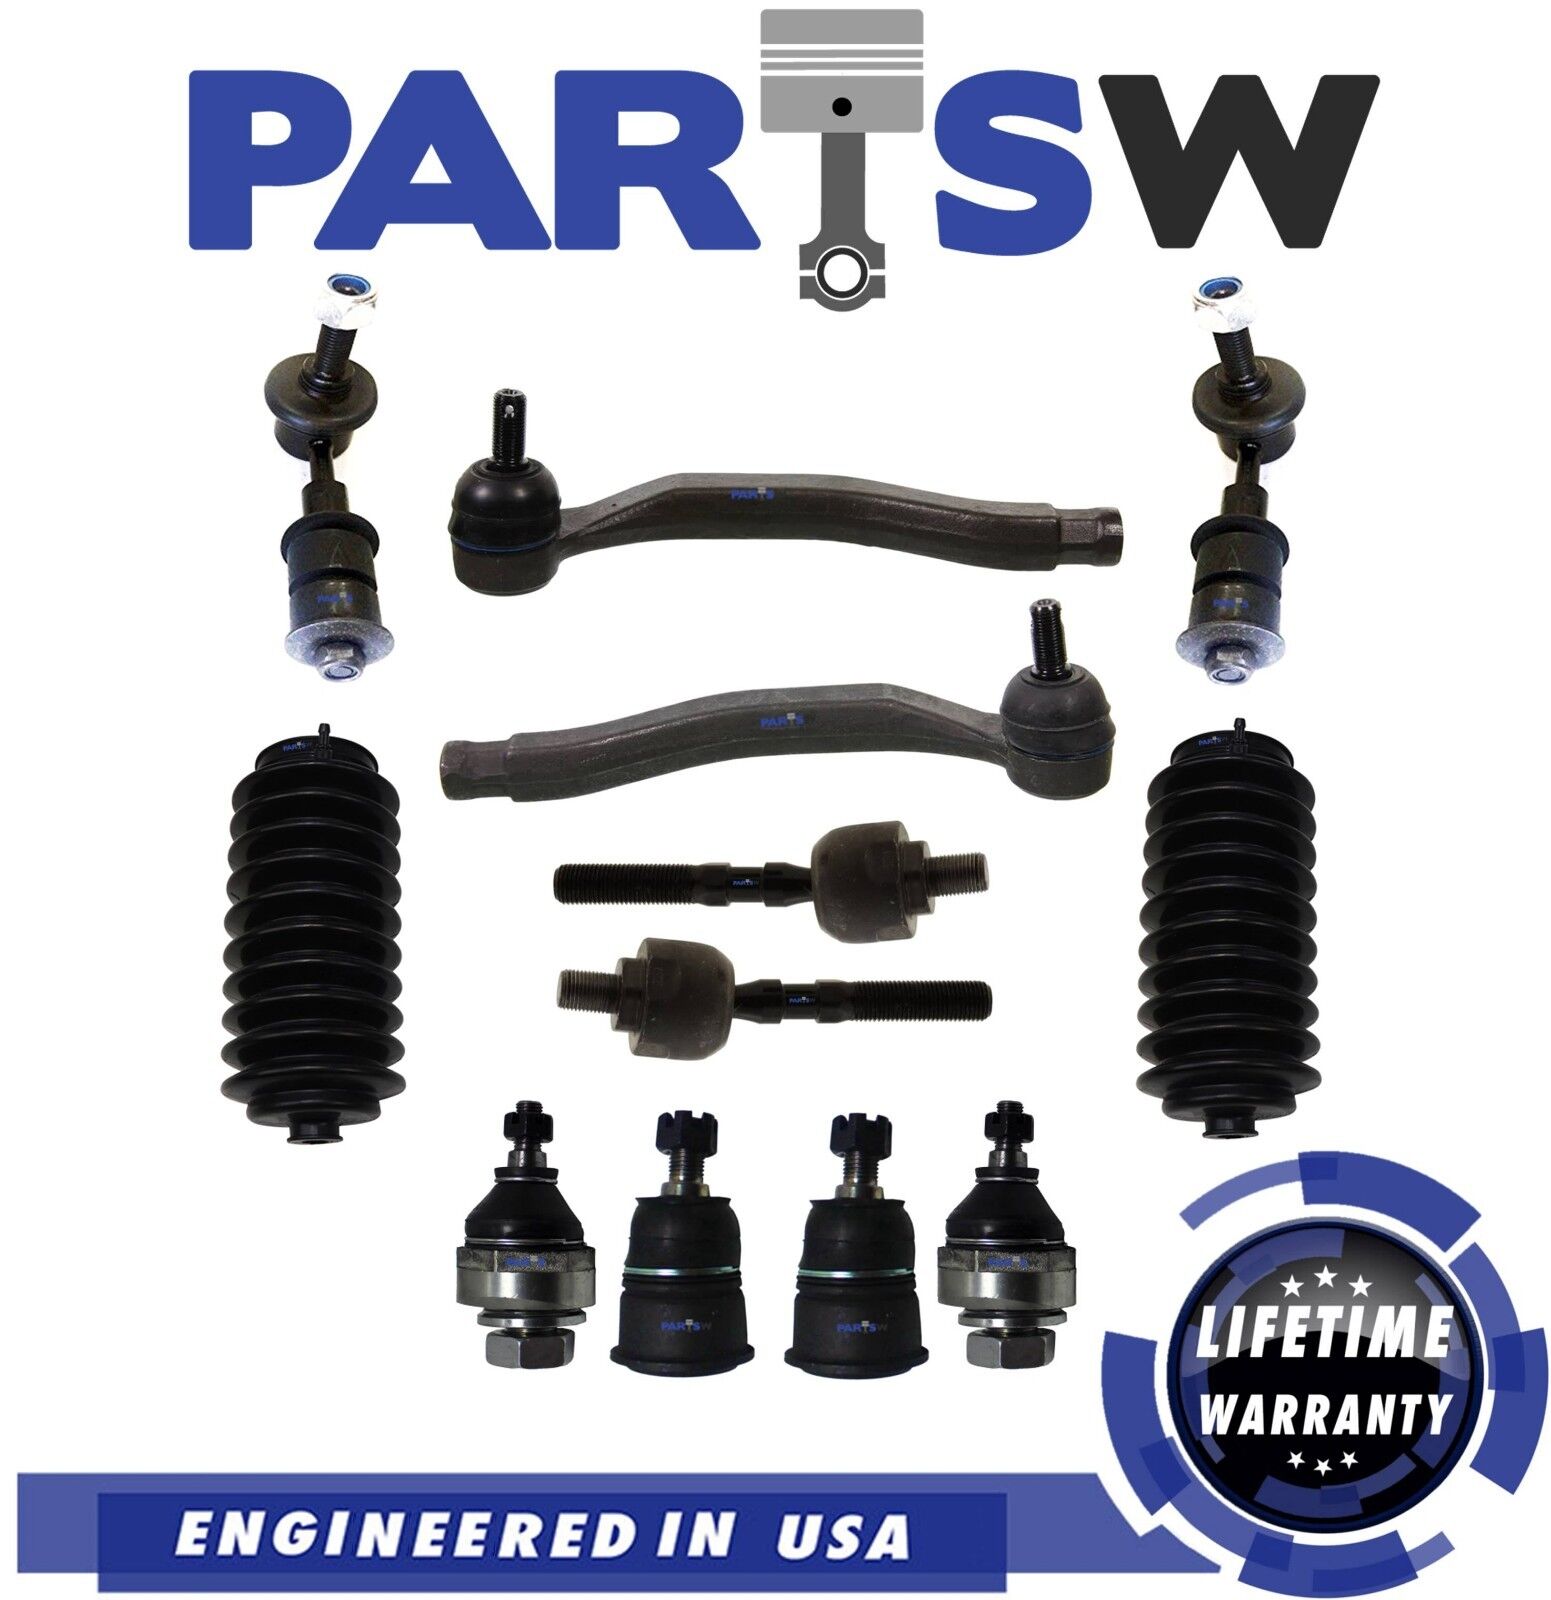 12 New Pc Suspension Kit for Honda Prelude 92-96 Tie Rods, Sway Bar, Ball Joint